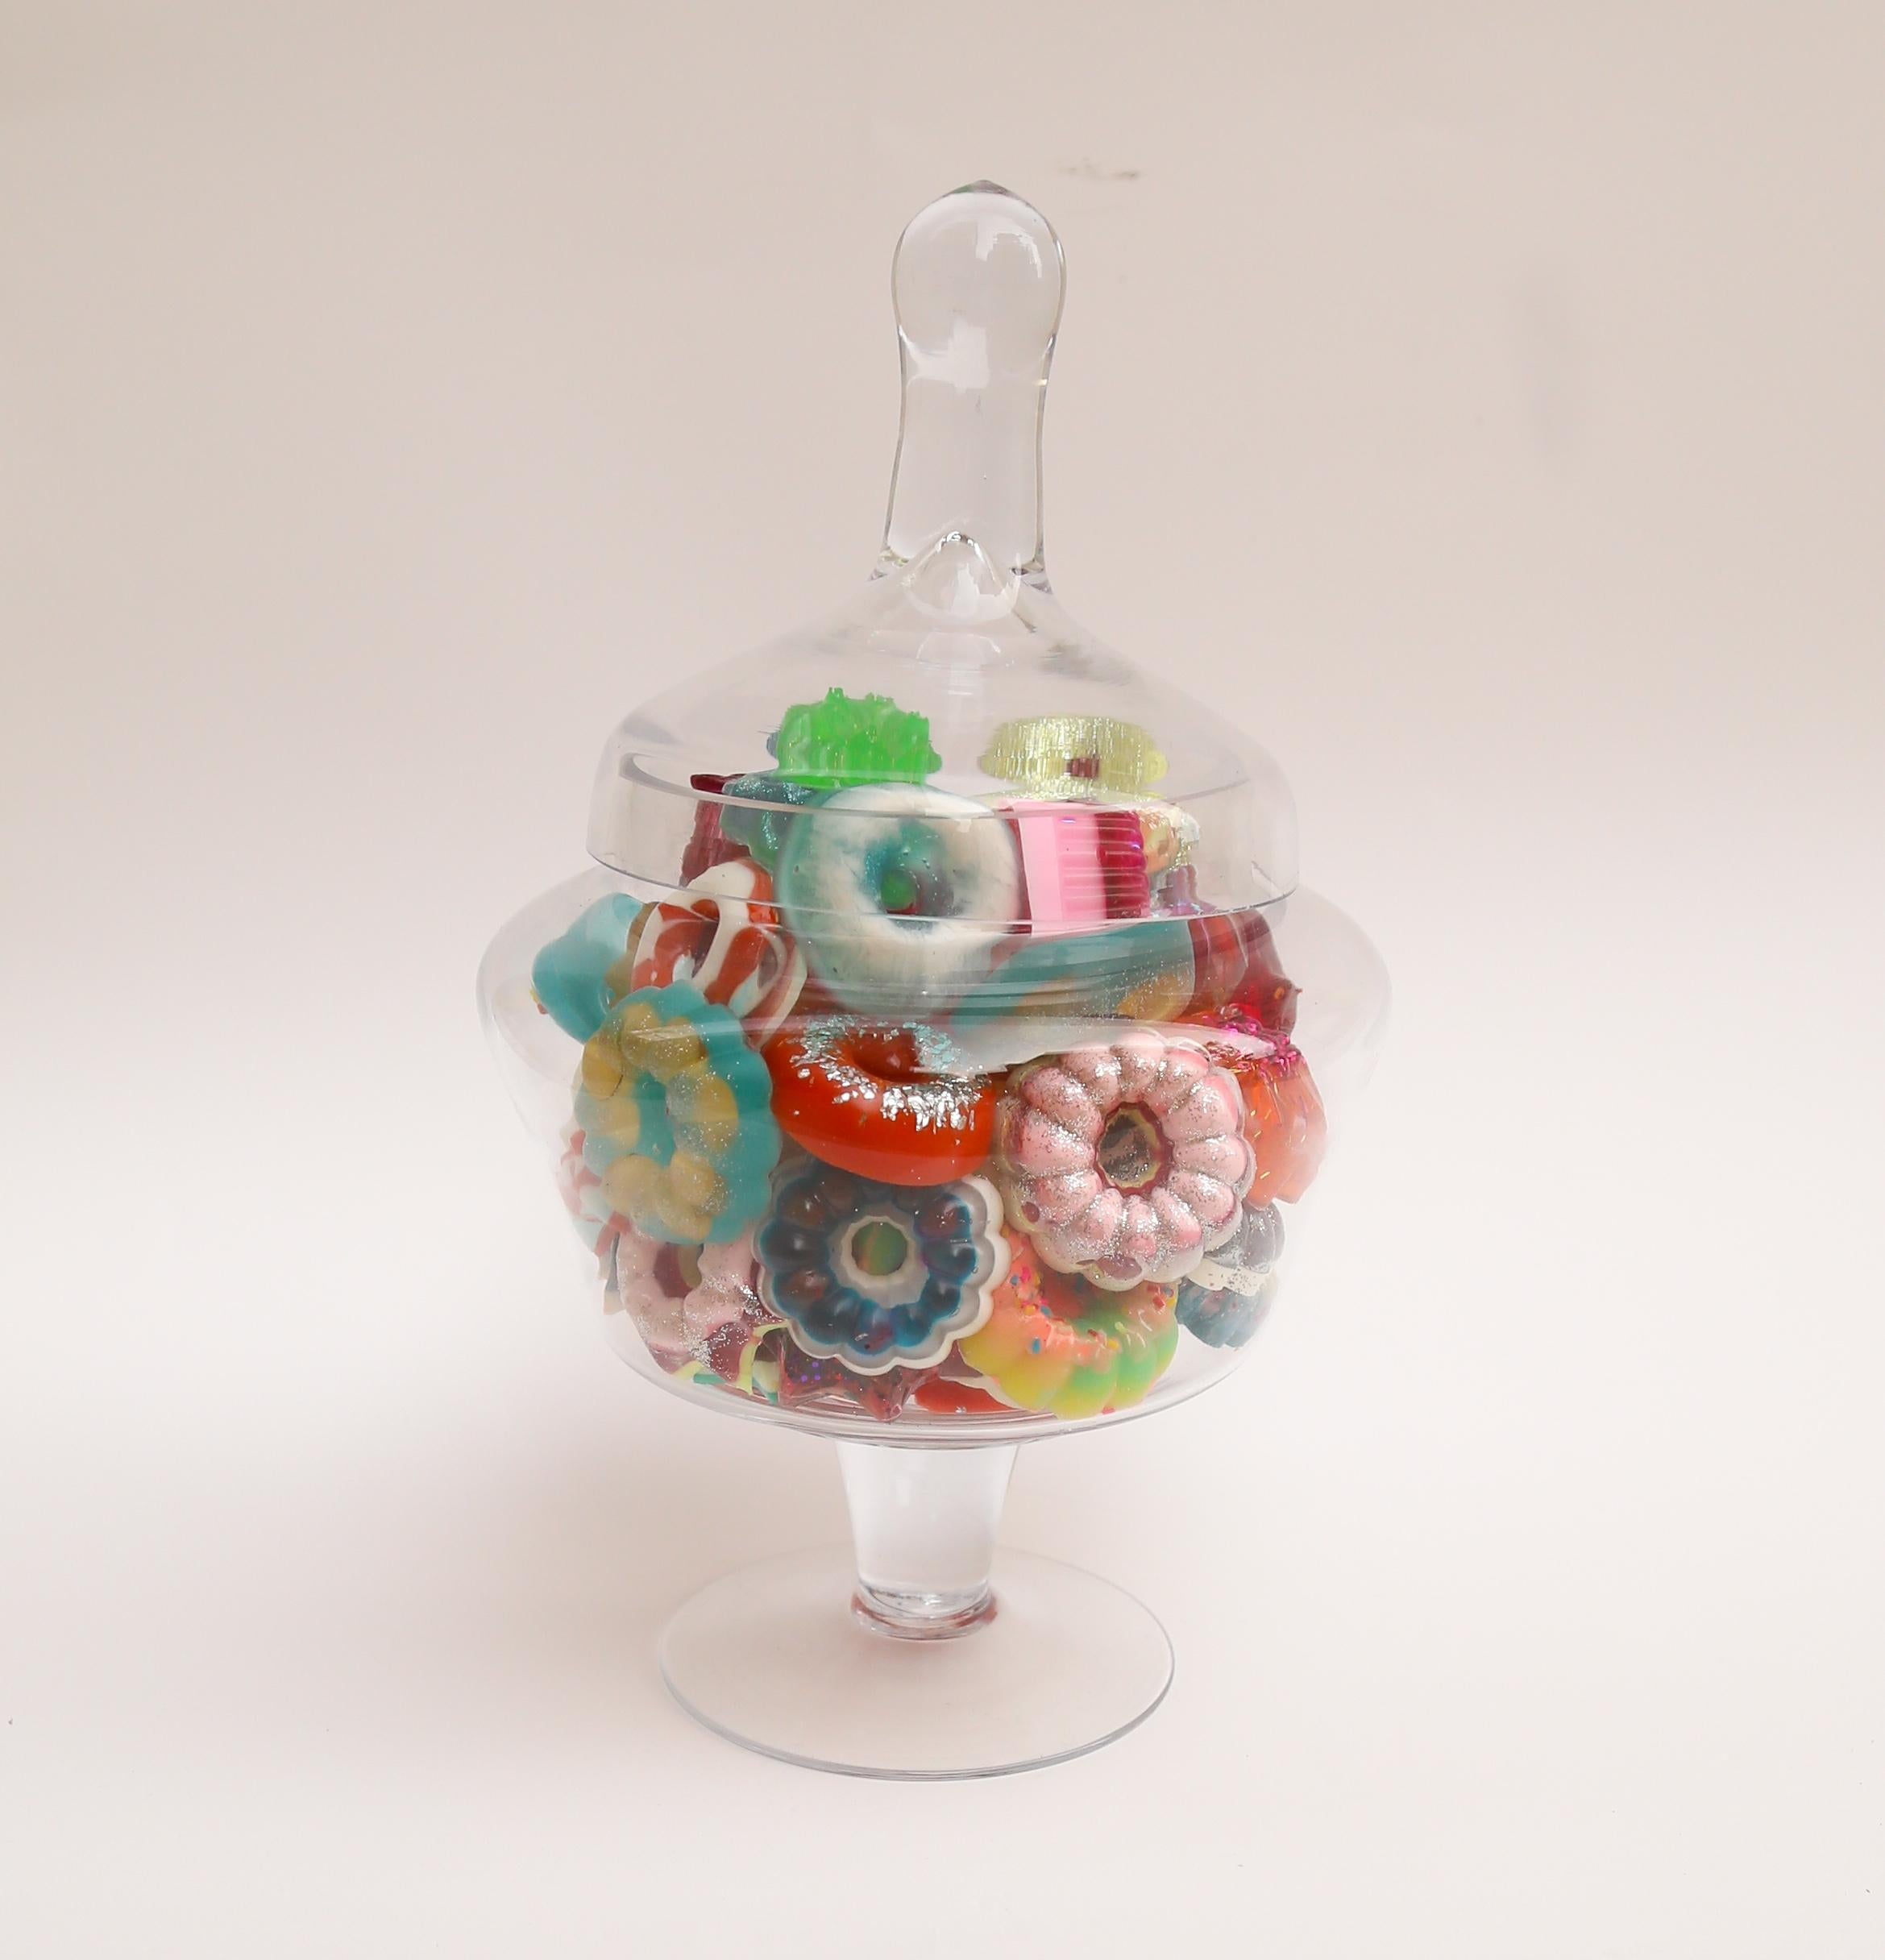 This is a glass candy jar filled with handmade resin donuts by Betsy Enzensberger. The donuts are loose and can be rearranged. The glass container can be emptied and cleaned as needed.

Although the artist is known for her melting popsicle